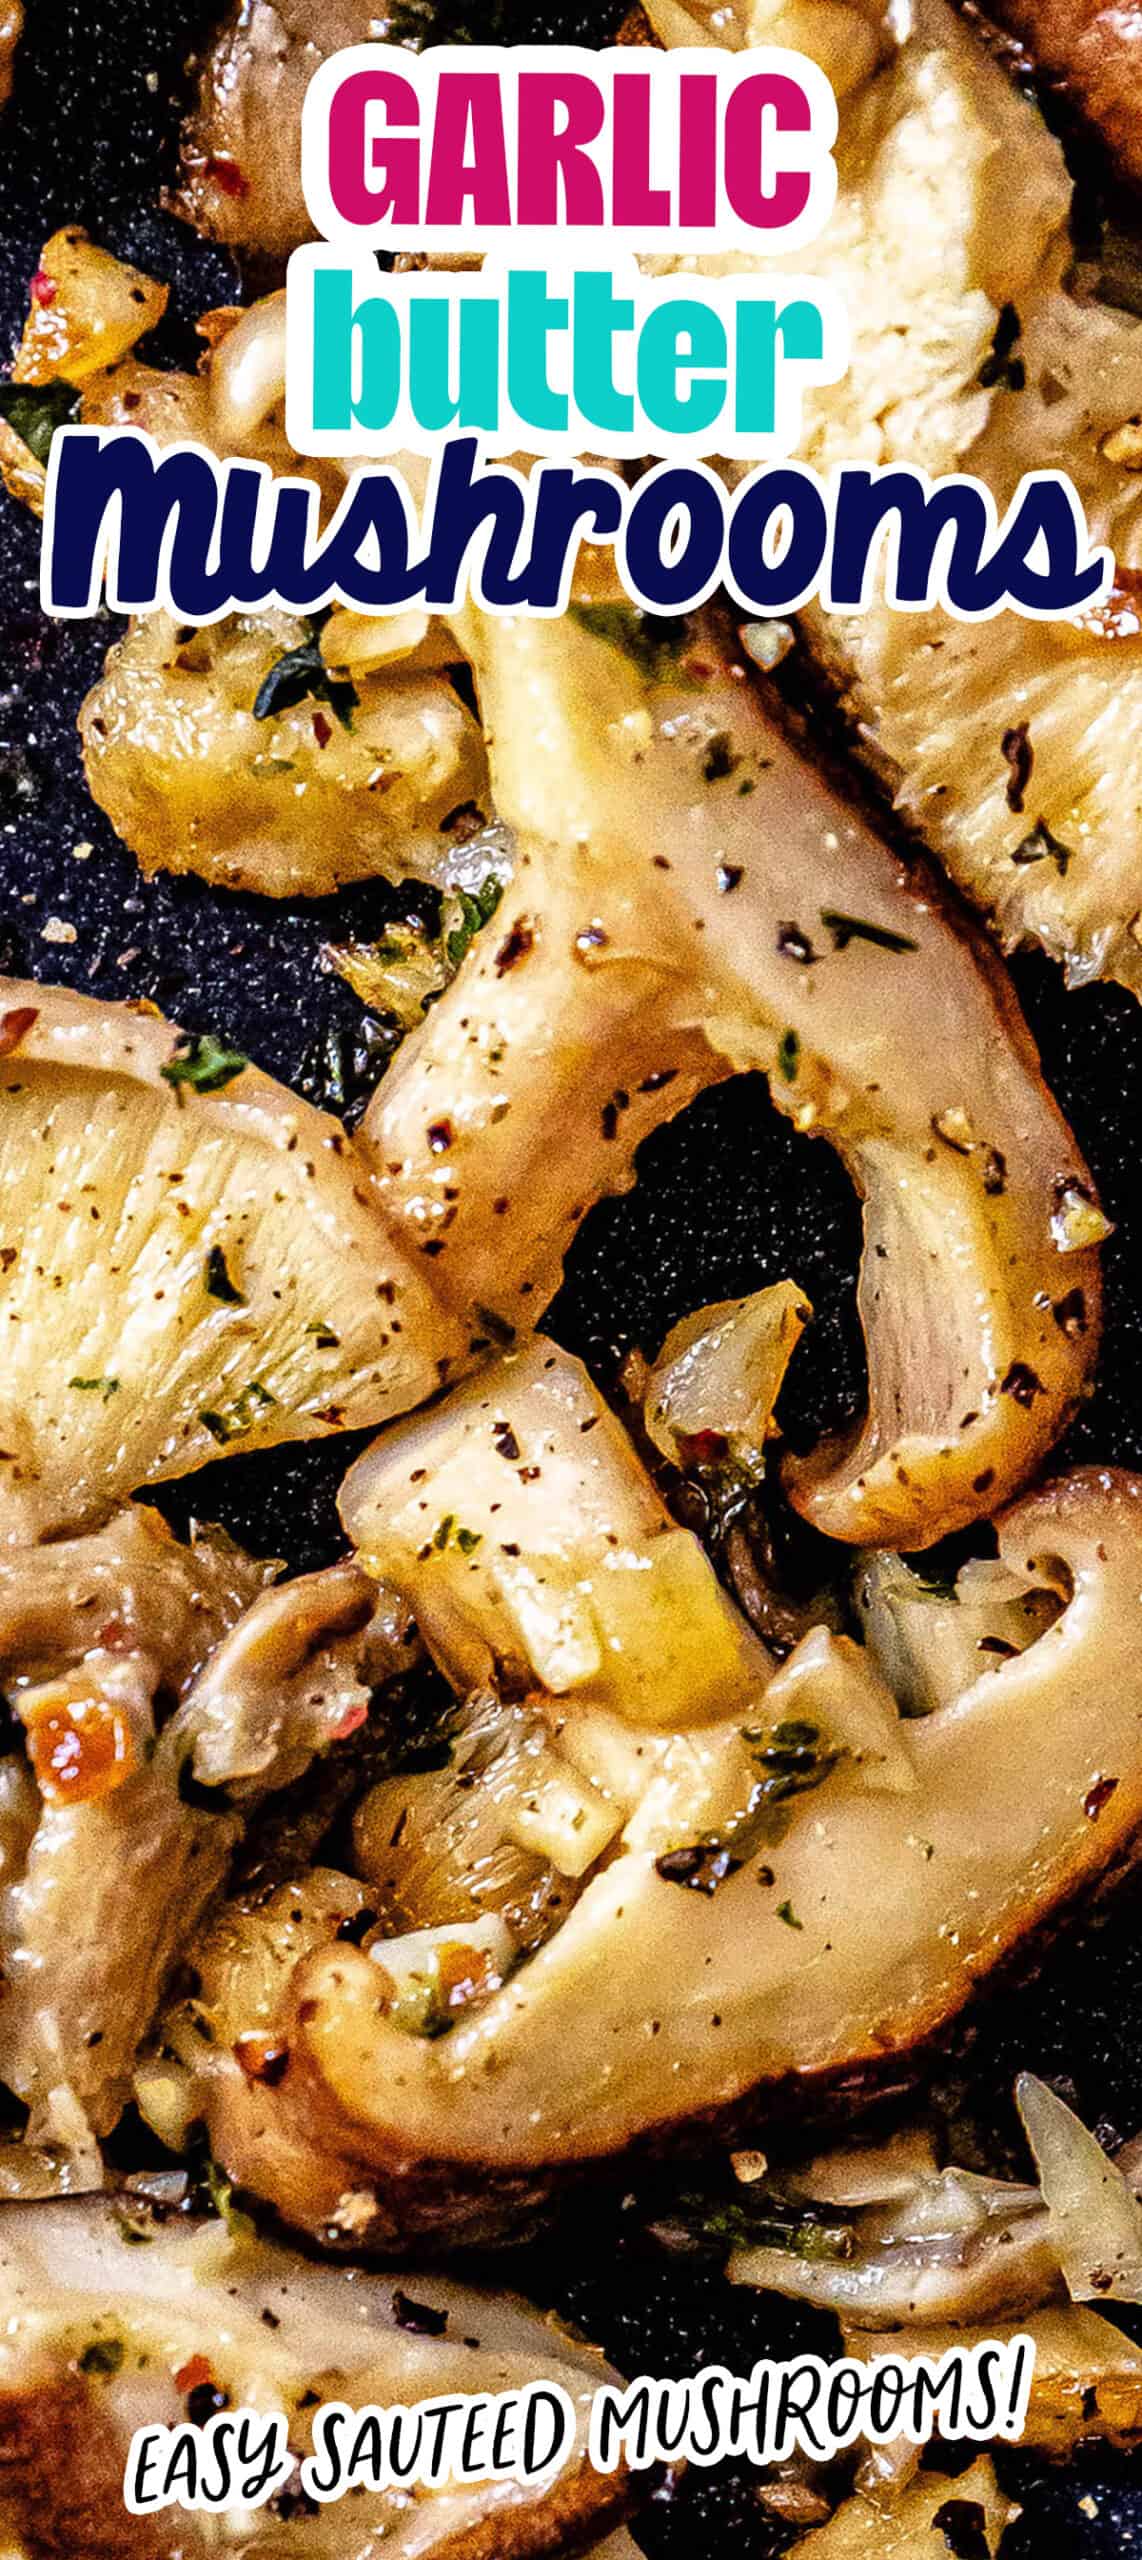 Enjoy the best garlic butter mushrooms as a delectable side dish served on a plate.